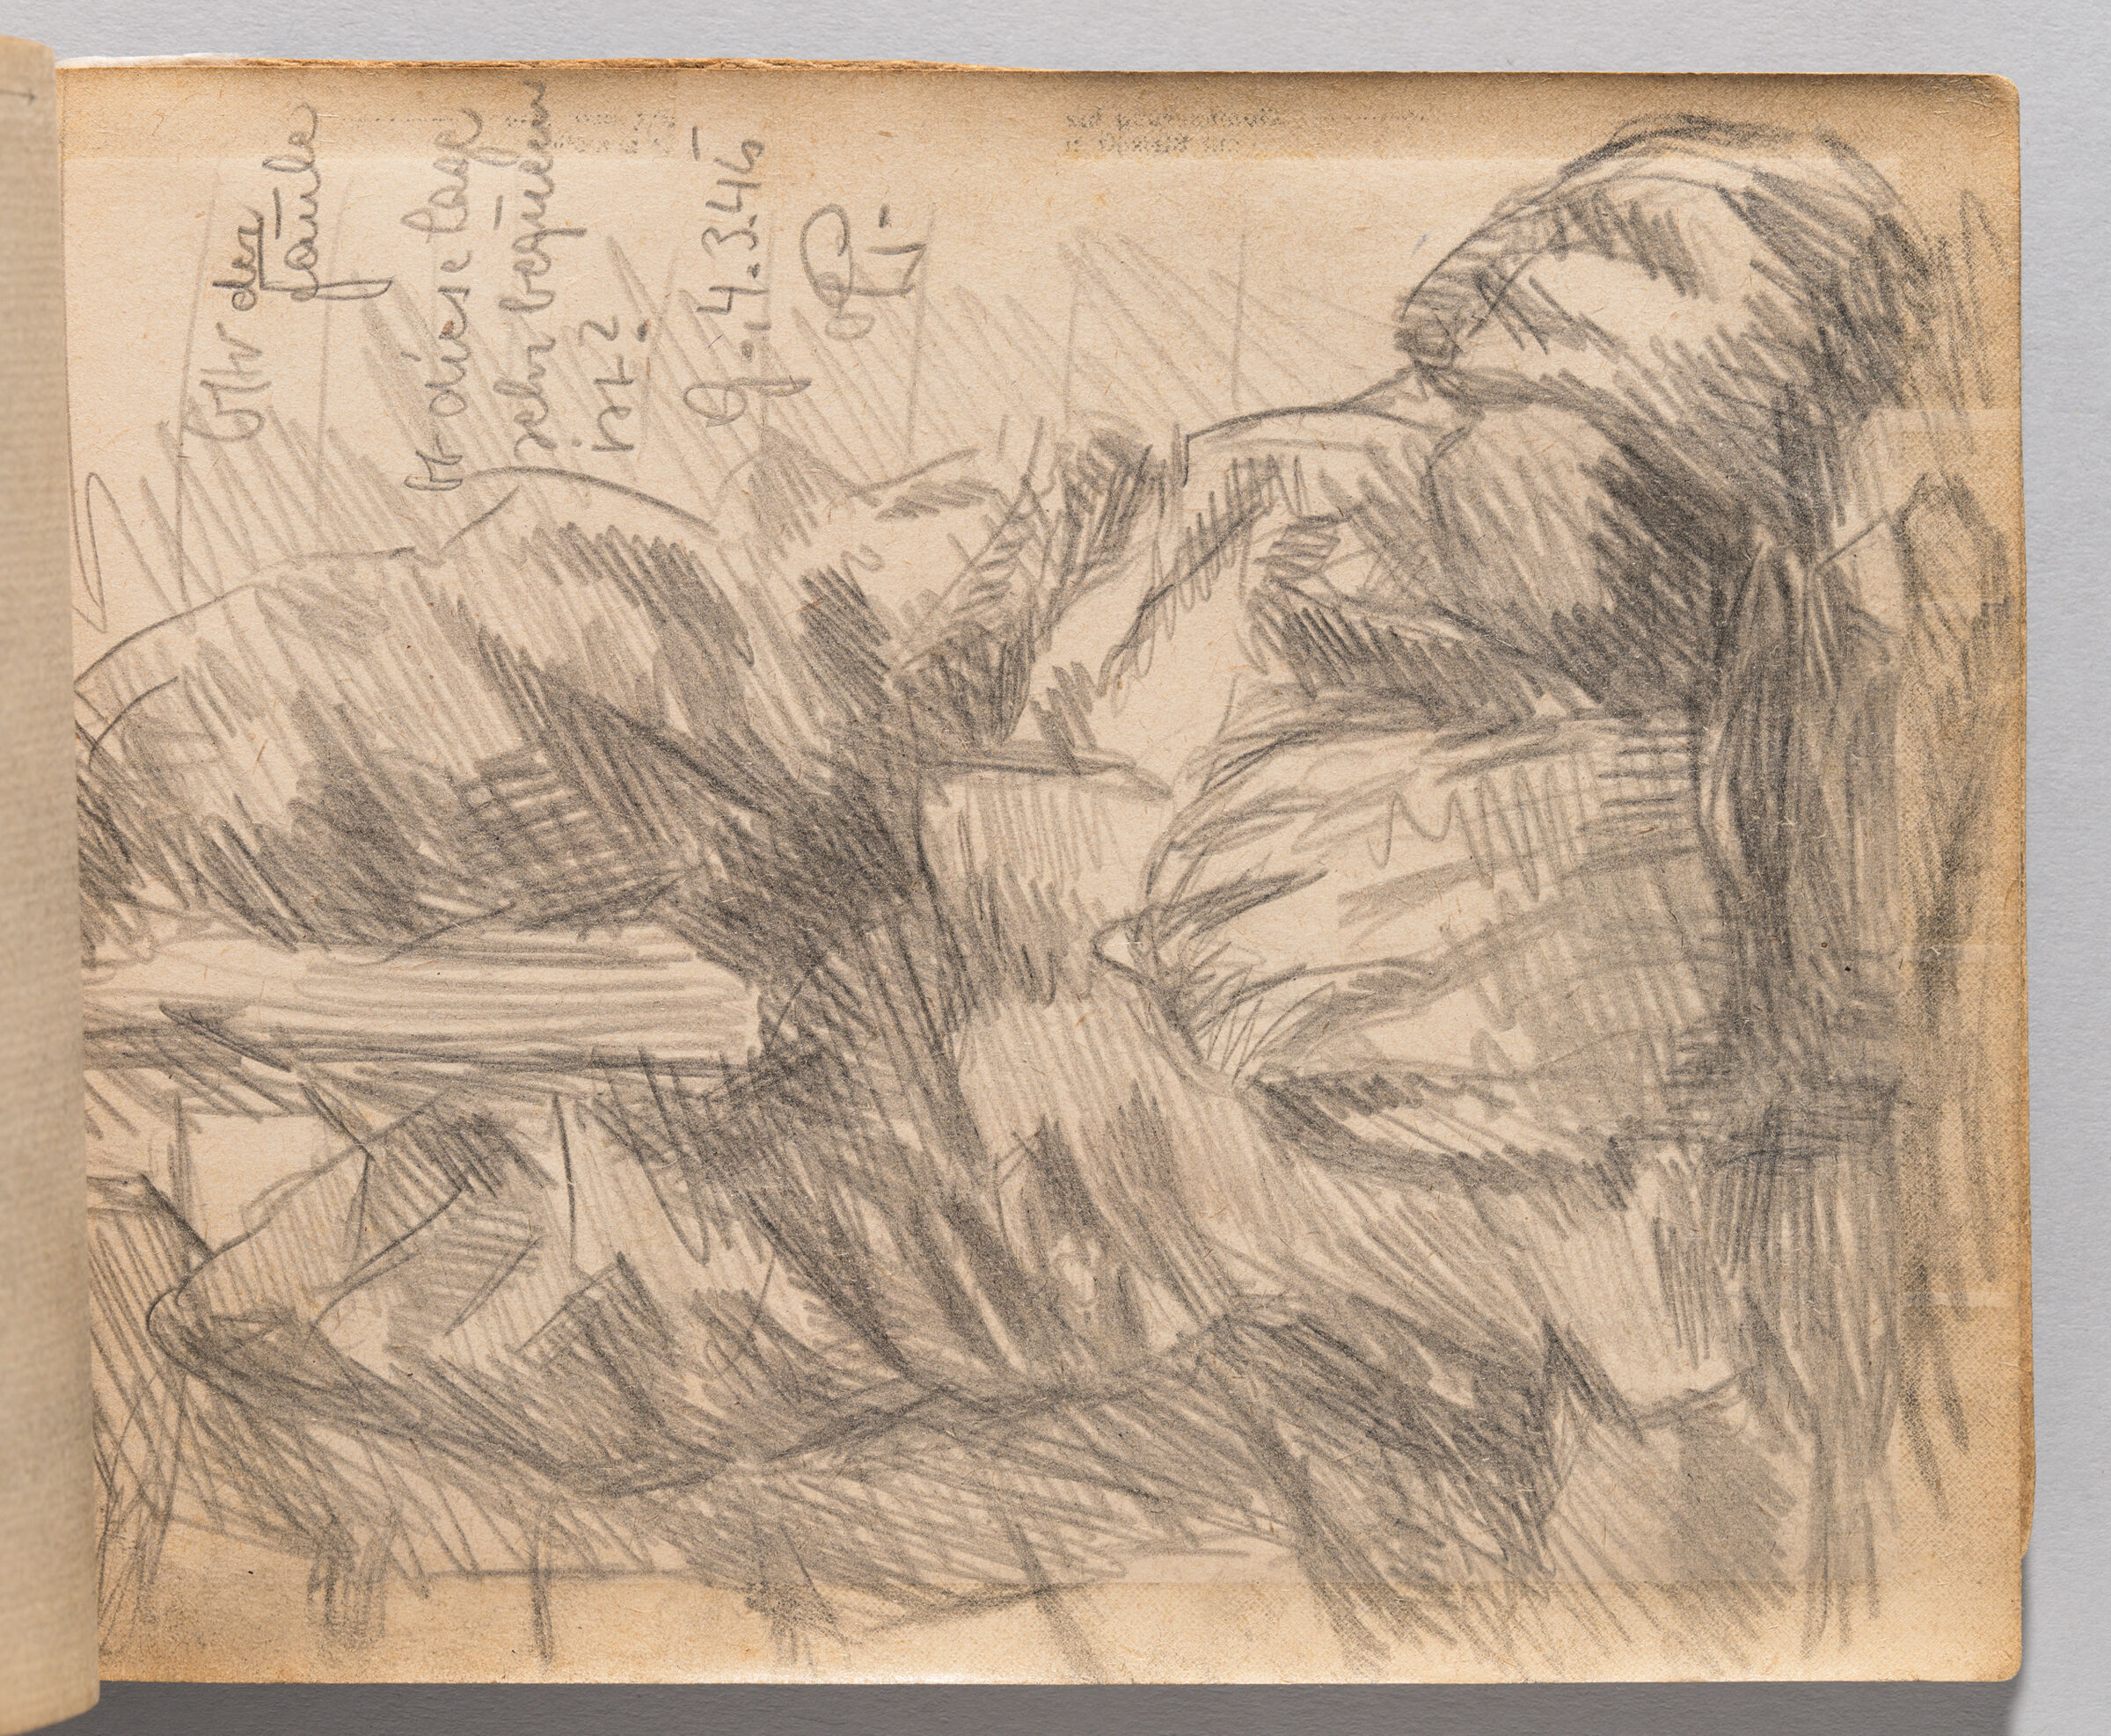 Untitled (Blank With Graphite Transfer, Left Page); Untitled (Lying Male Figure, Right Page)